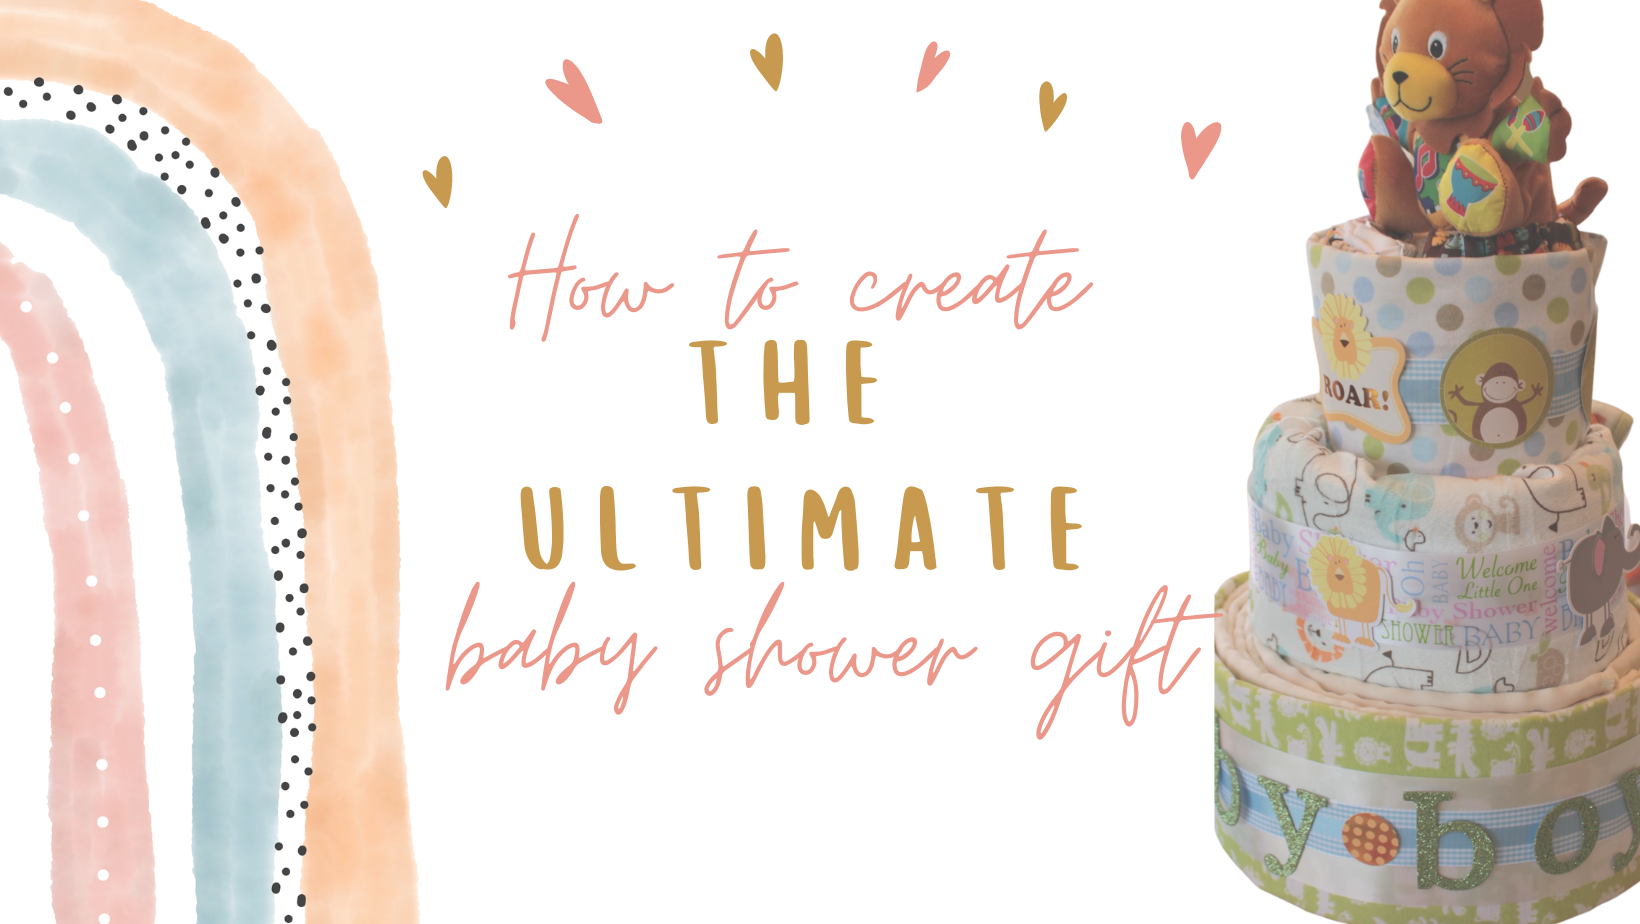 How to Create the Ultimate Baby Shower Gift